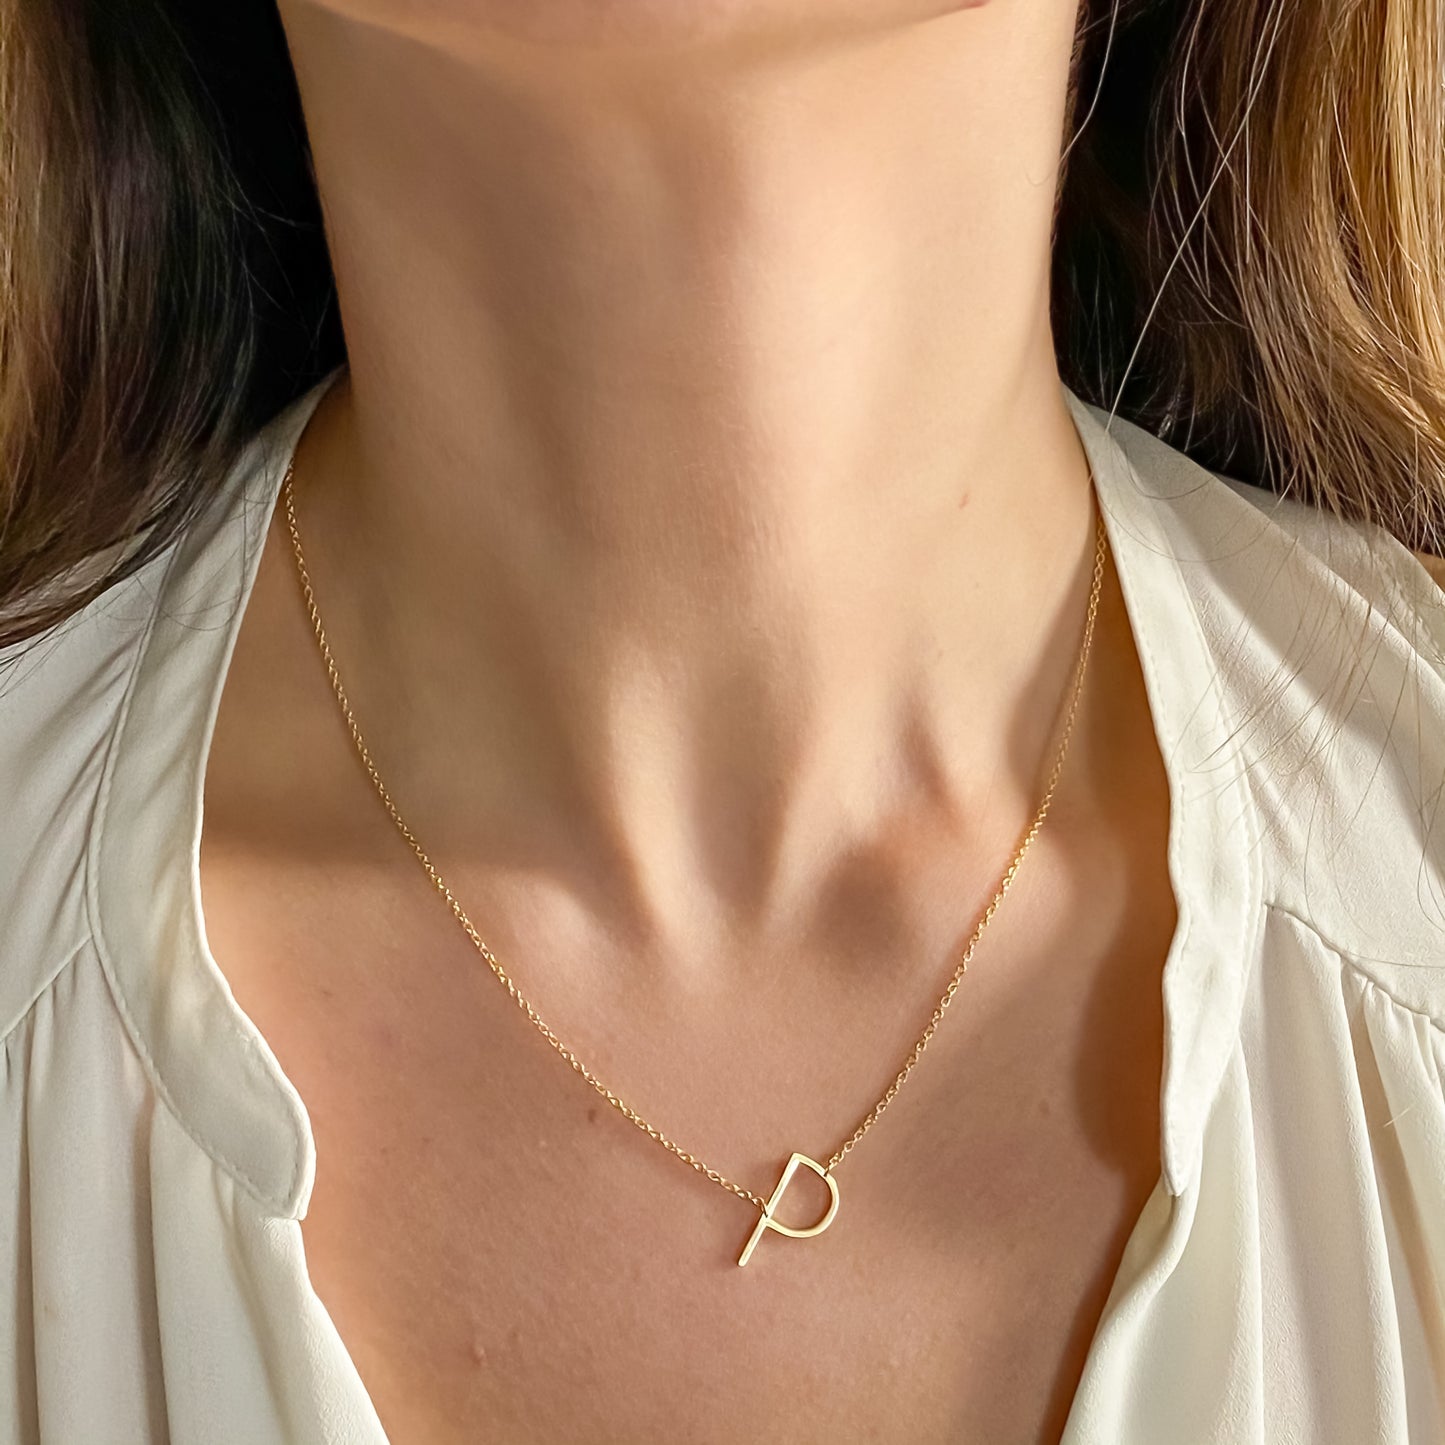 Wearing the gold sideways letter P initial necklace - Alexandra Marks Jewelry